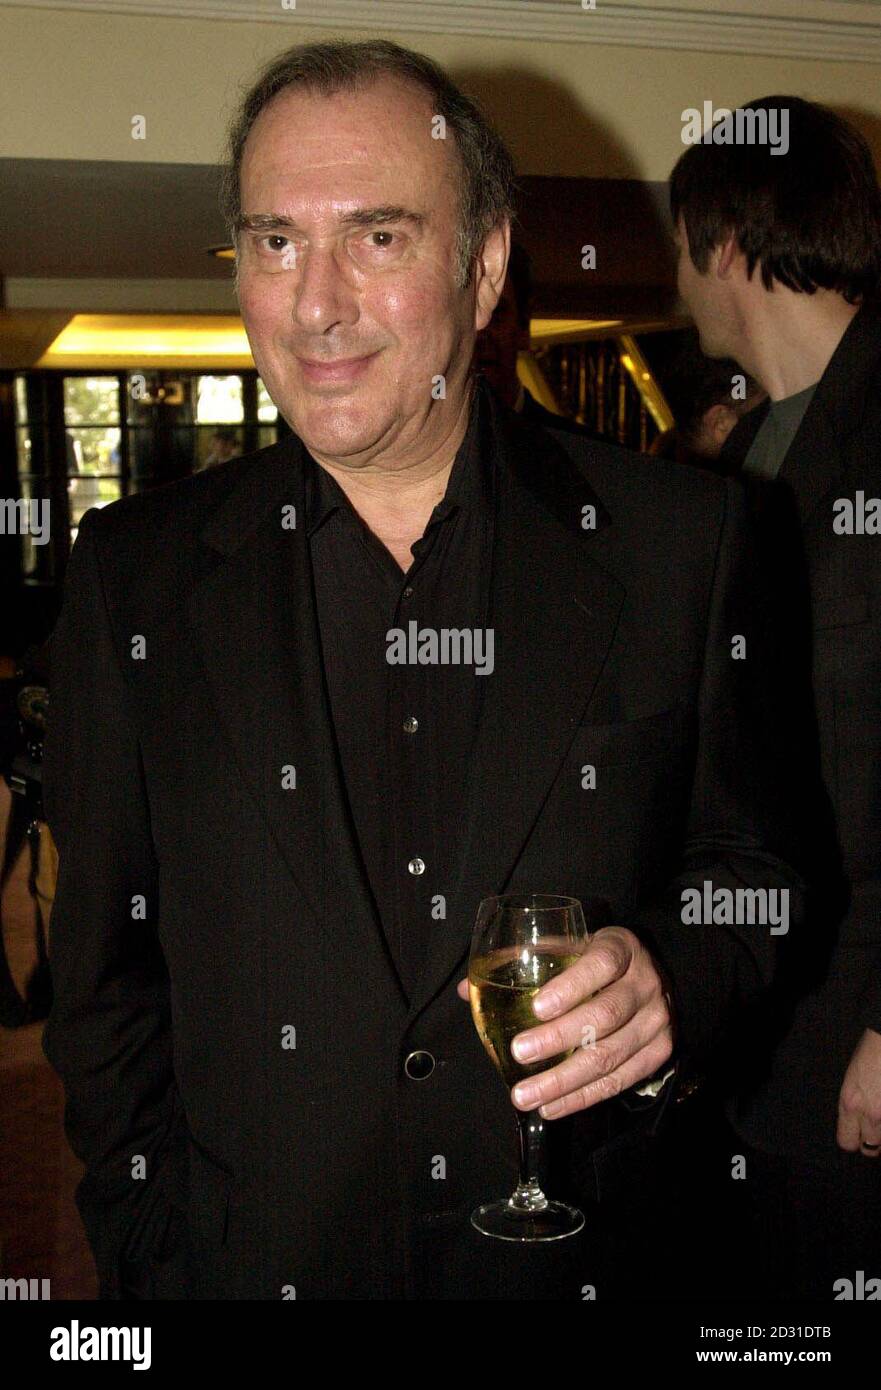 Playwright and actor Harold Pinter arrives for the South Bank Awards, at the Savoy Hotel in London. The awards recognise achievements in all fields of the arts ranging from opera and dance to cinema and TV drama.  *Playwright and actor Harold Pinter arriving for the South Bank Awards, at the Savoy Hotel in London. The playwright and dramatist has been diagnosed with cancer, his agent confirmed Friday 1 February, 2002. The 71 year old was diagnosed with cancer of the oesophagus last month and is undergoing chemotherapy, according to his agent Judy Daish. Pinter, whose work includes The Birthday Stock Photo